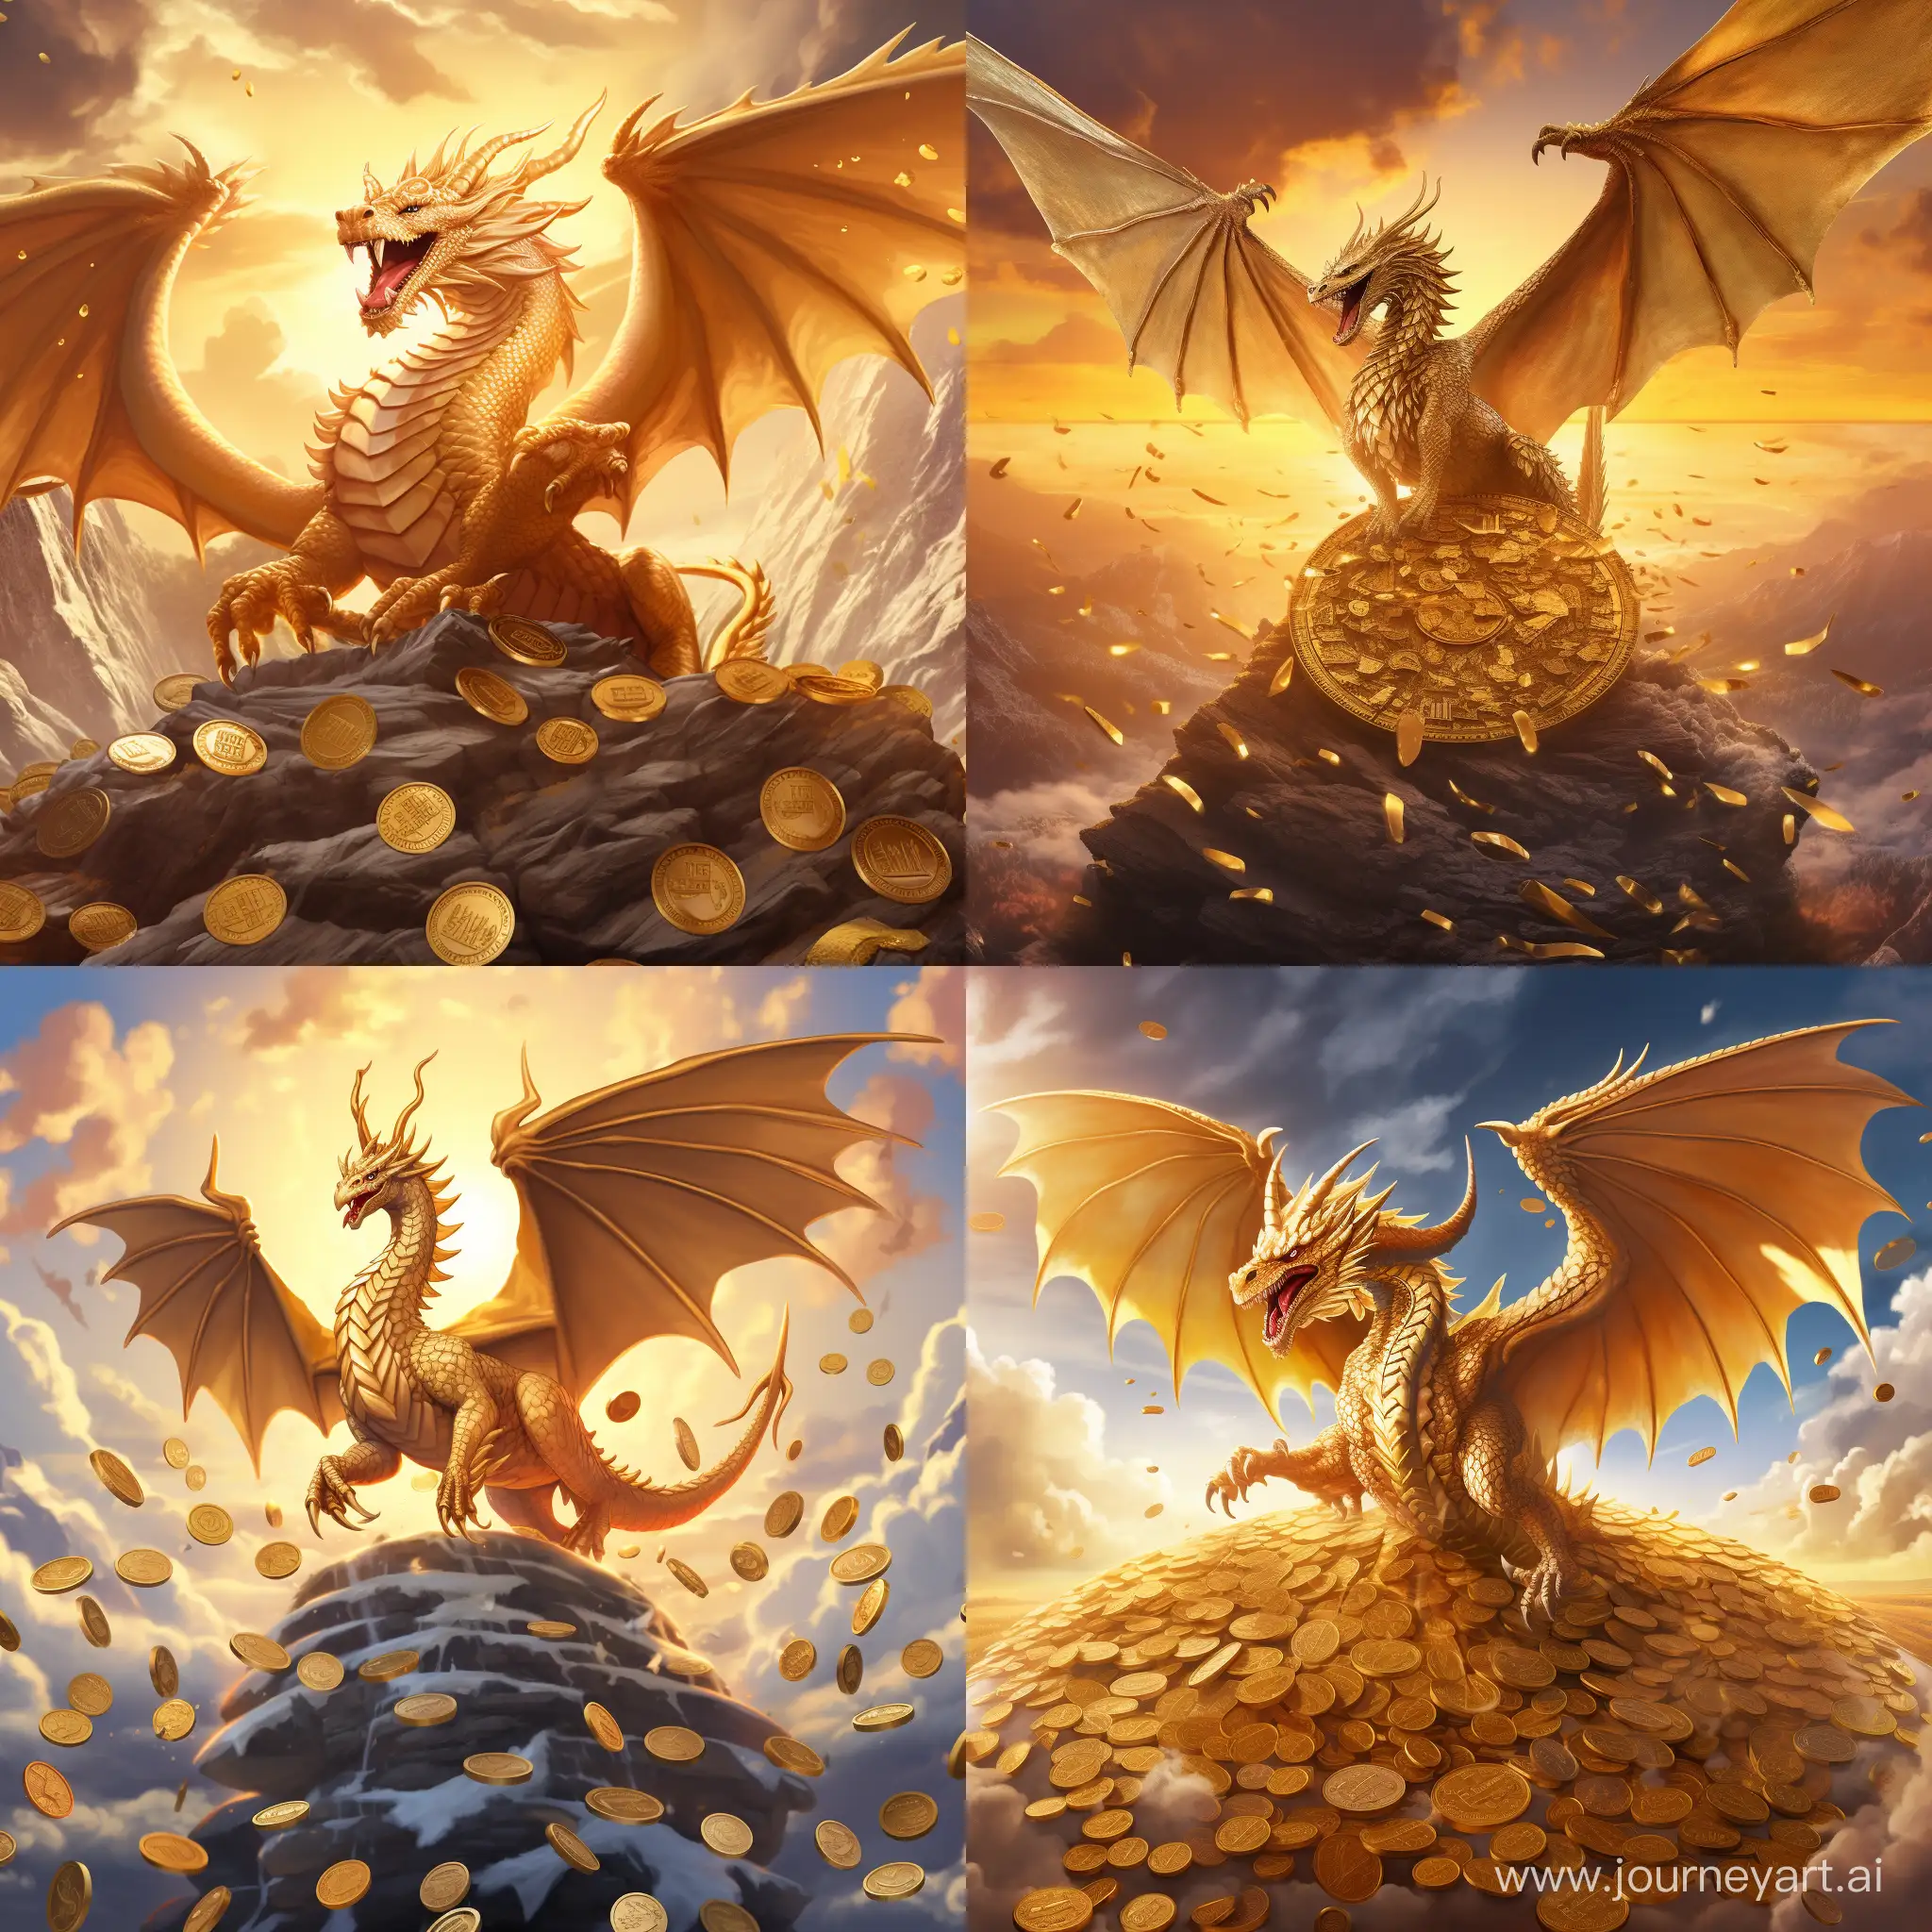 a golden dragon flying in the golden sky, his hands hold gold coin, surrounded by cgold coins, realistic